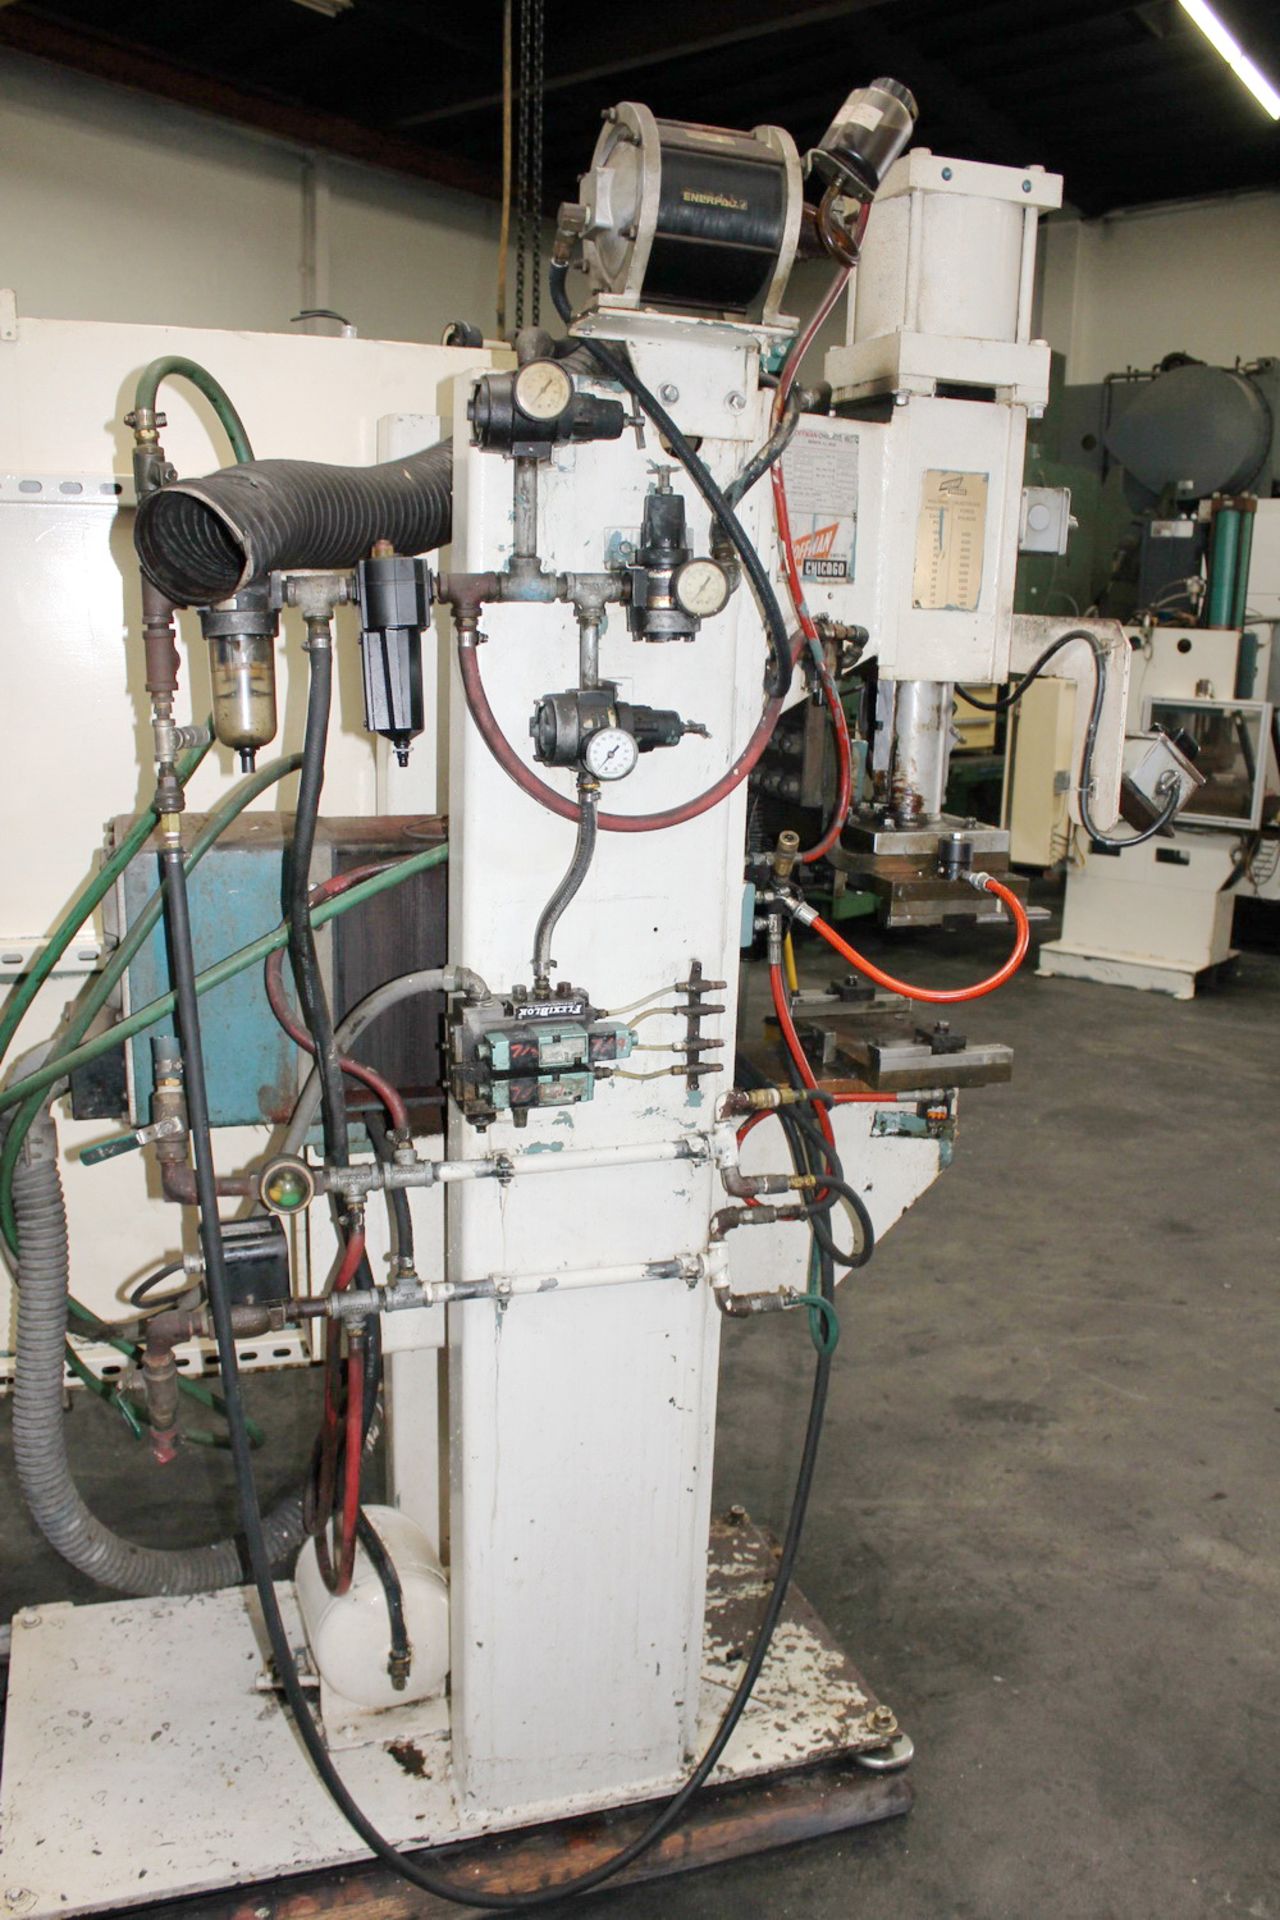 Hoffman Press Type Spot Welder 125 KVA x 14''. LOADING FEE FOR THIS LOT: $150 - Image 7 of 18